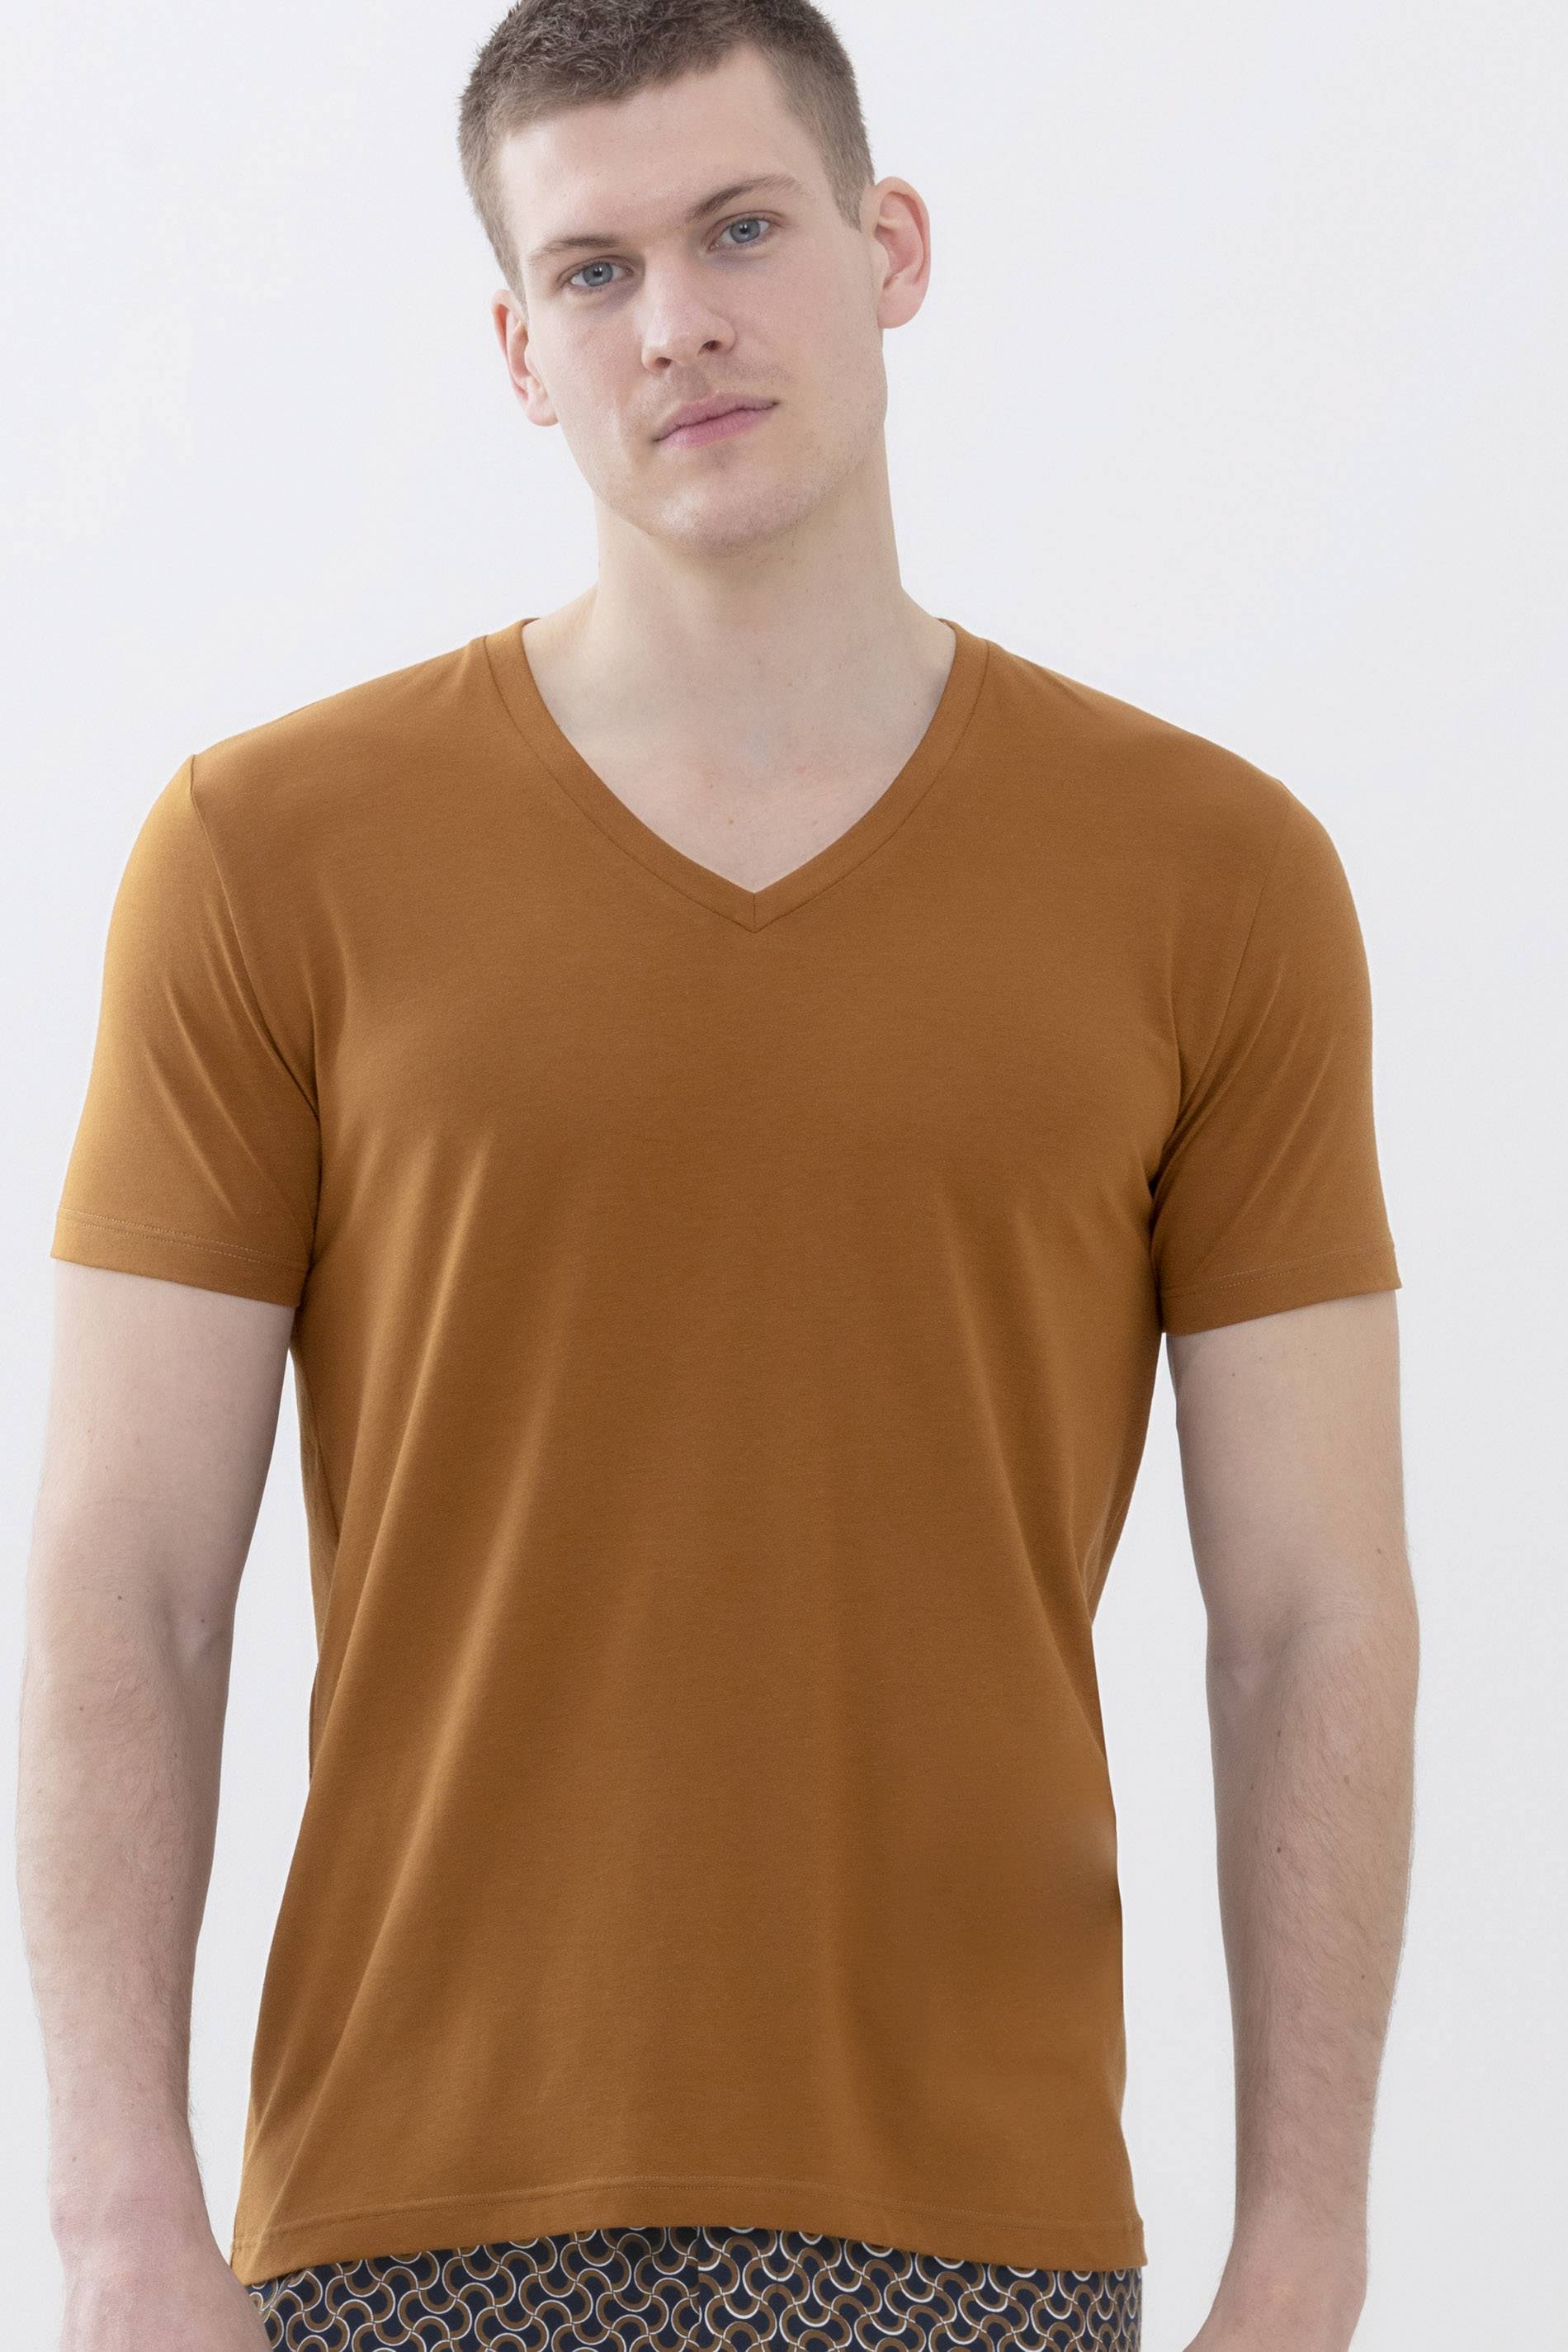 V-neck Brown Toffee Dry Cotton Colour Front View | mey®